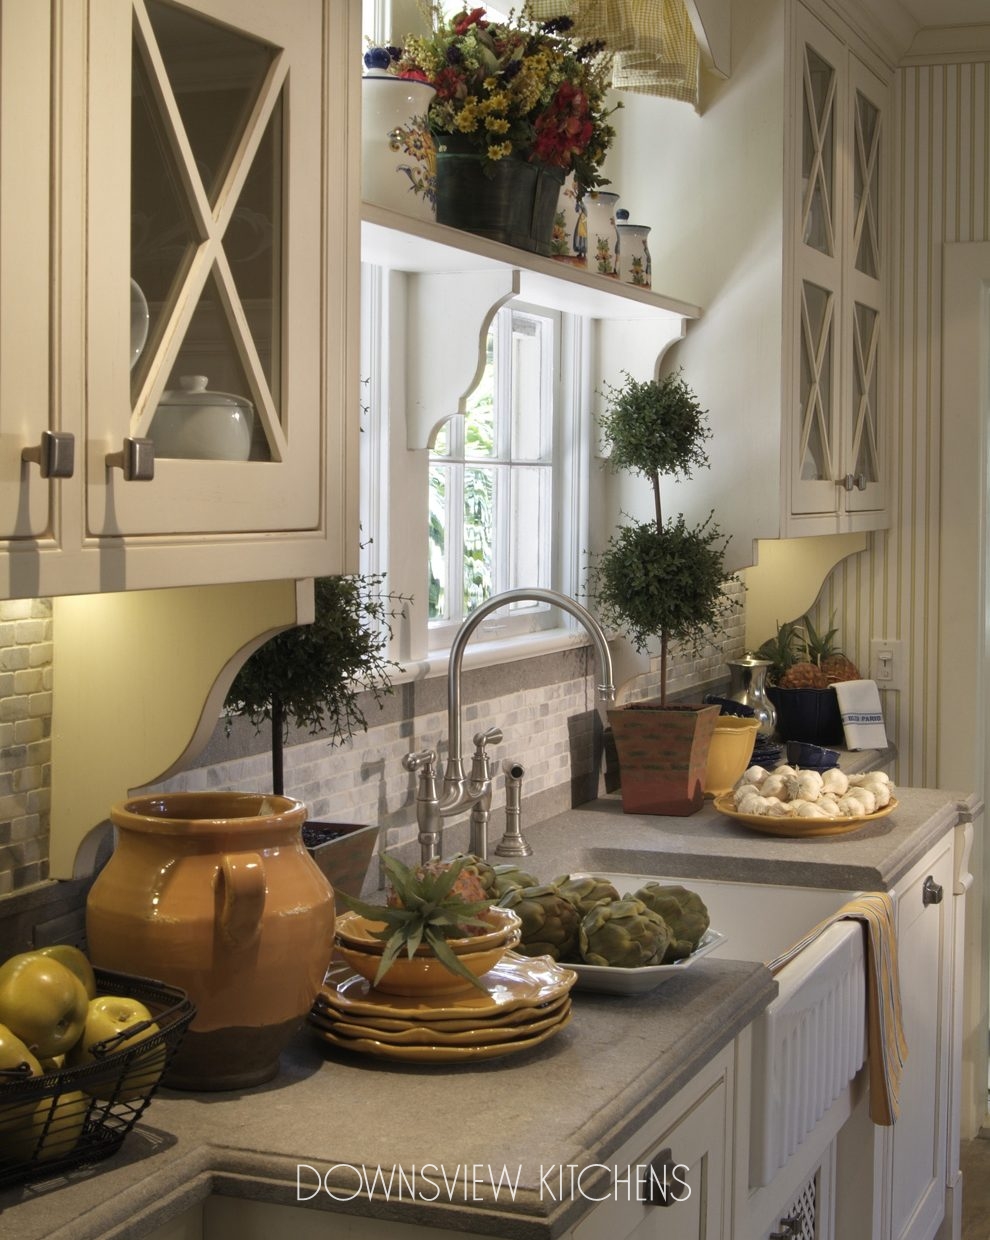 PALM BEACH COTTAGE - Downsview Kitchens and Fine Custom Cabinetry ...